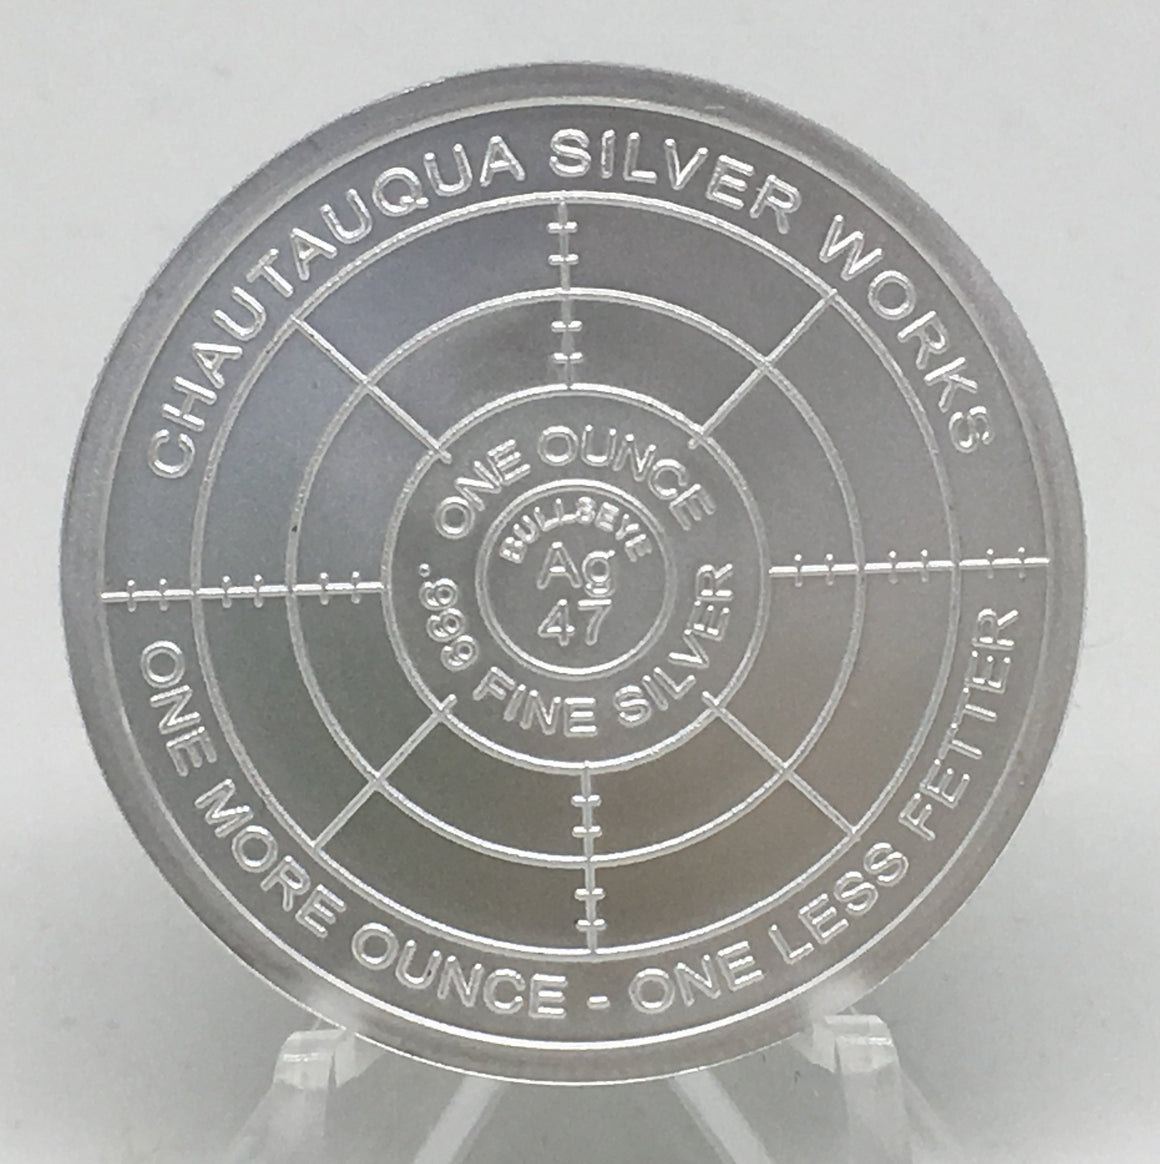 Toxic Series Too #6 Enforced Compliance, BU Finish by Chautauqua Silver Works, 1oz .999 Silver Round.